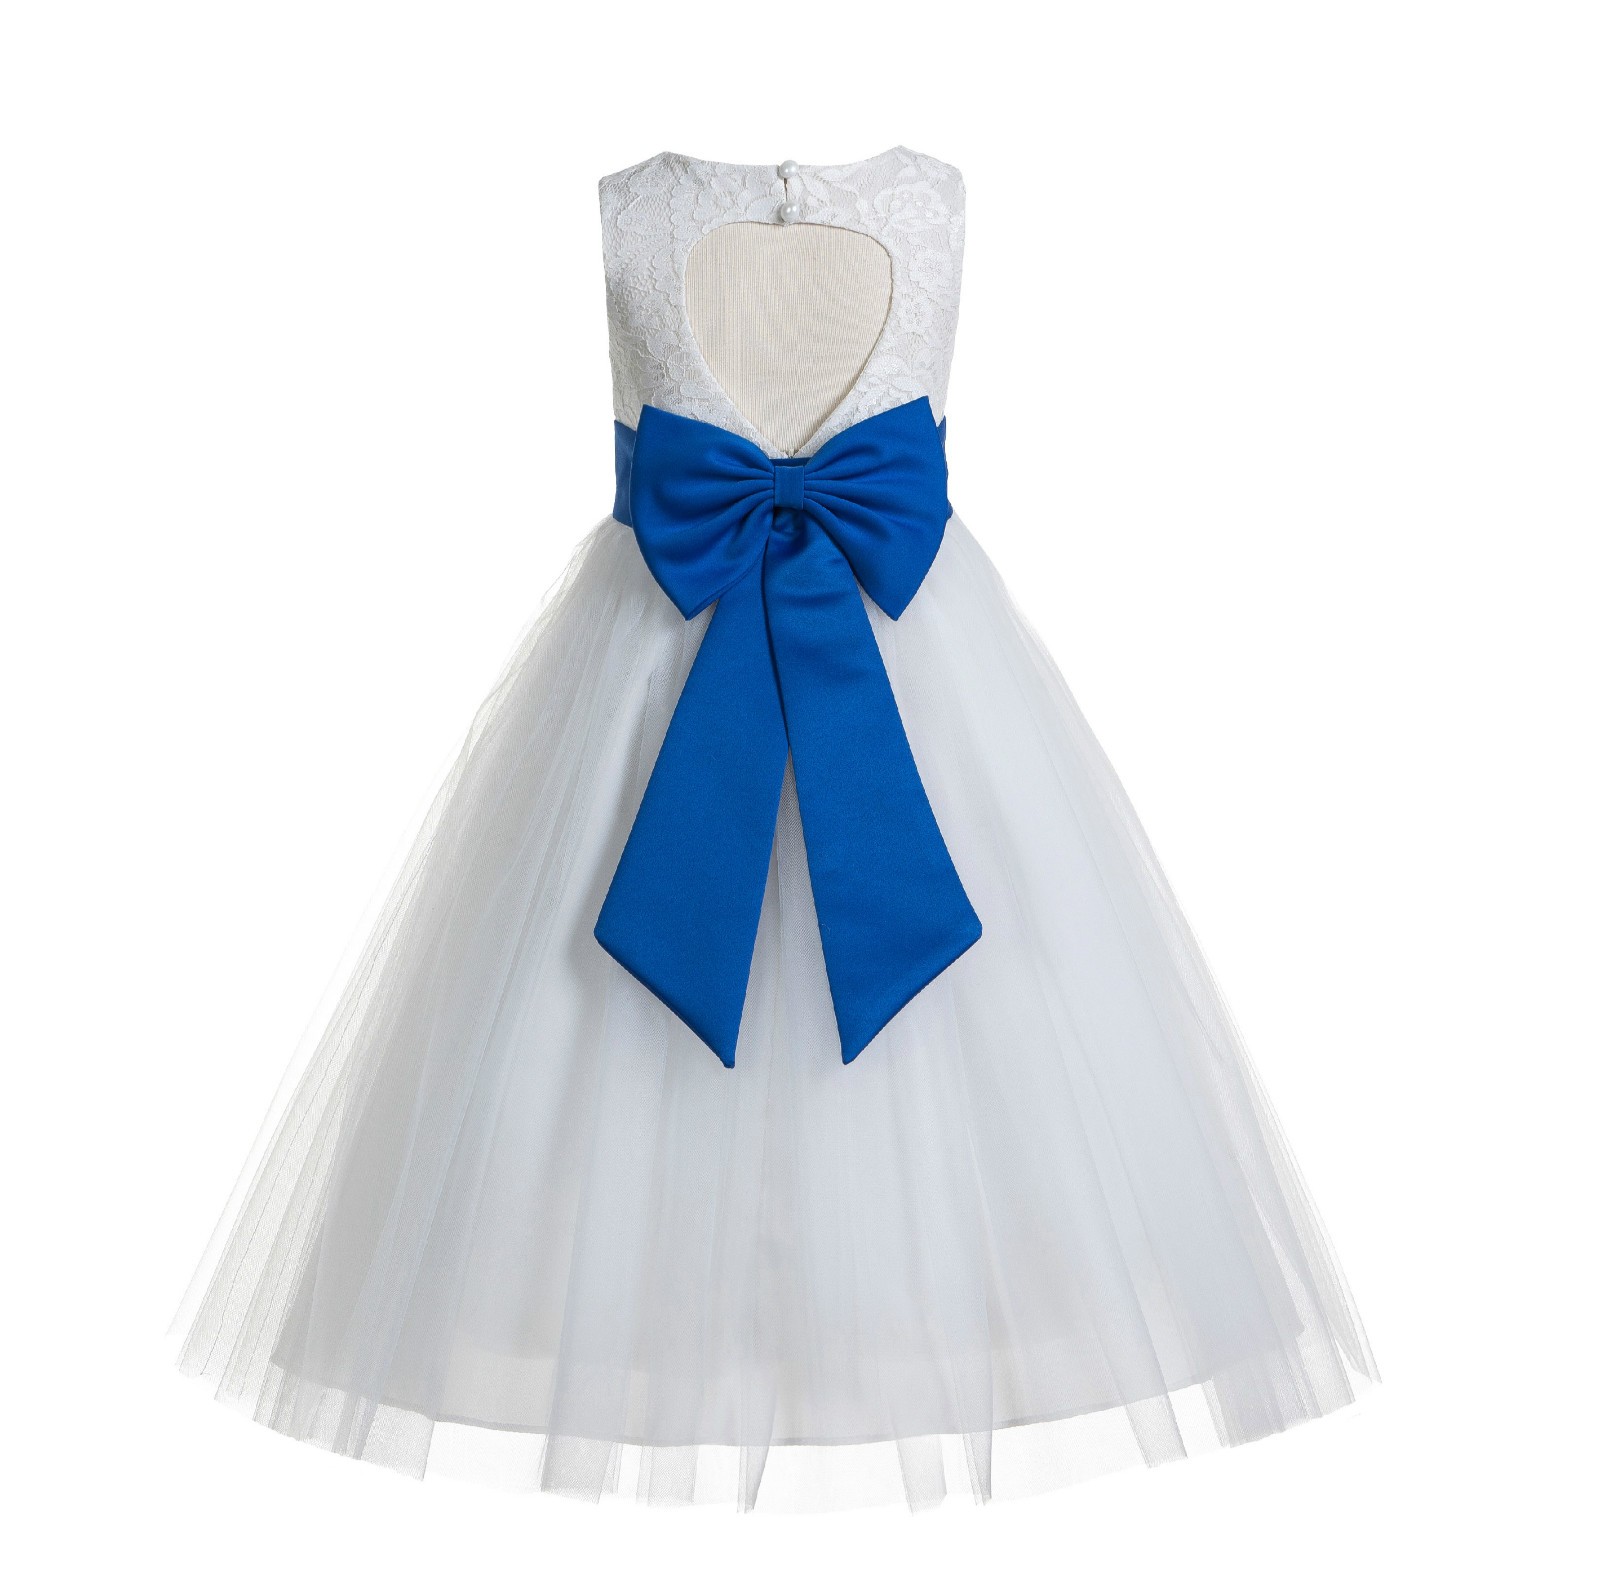 Ivory / Royal Blue Floral Lace Heart Cutout Flower Girl Dress with Flower 172T